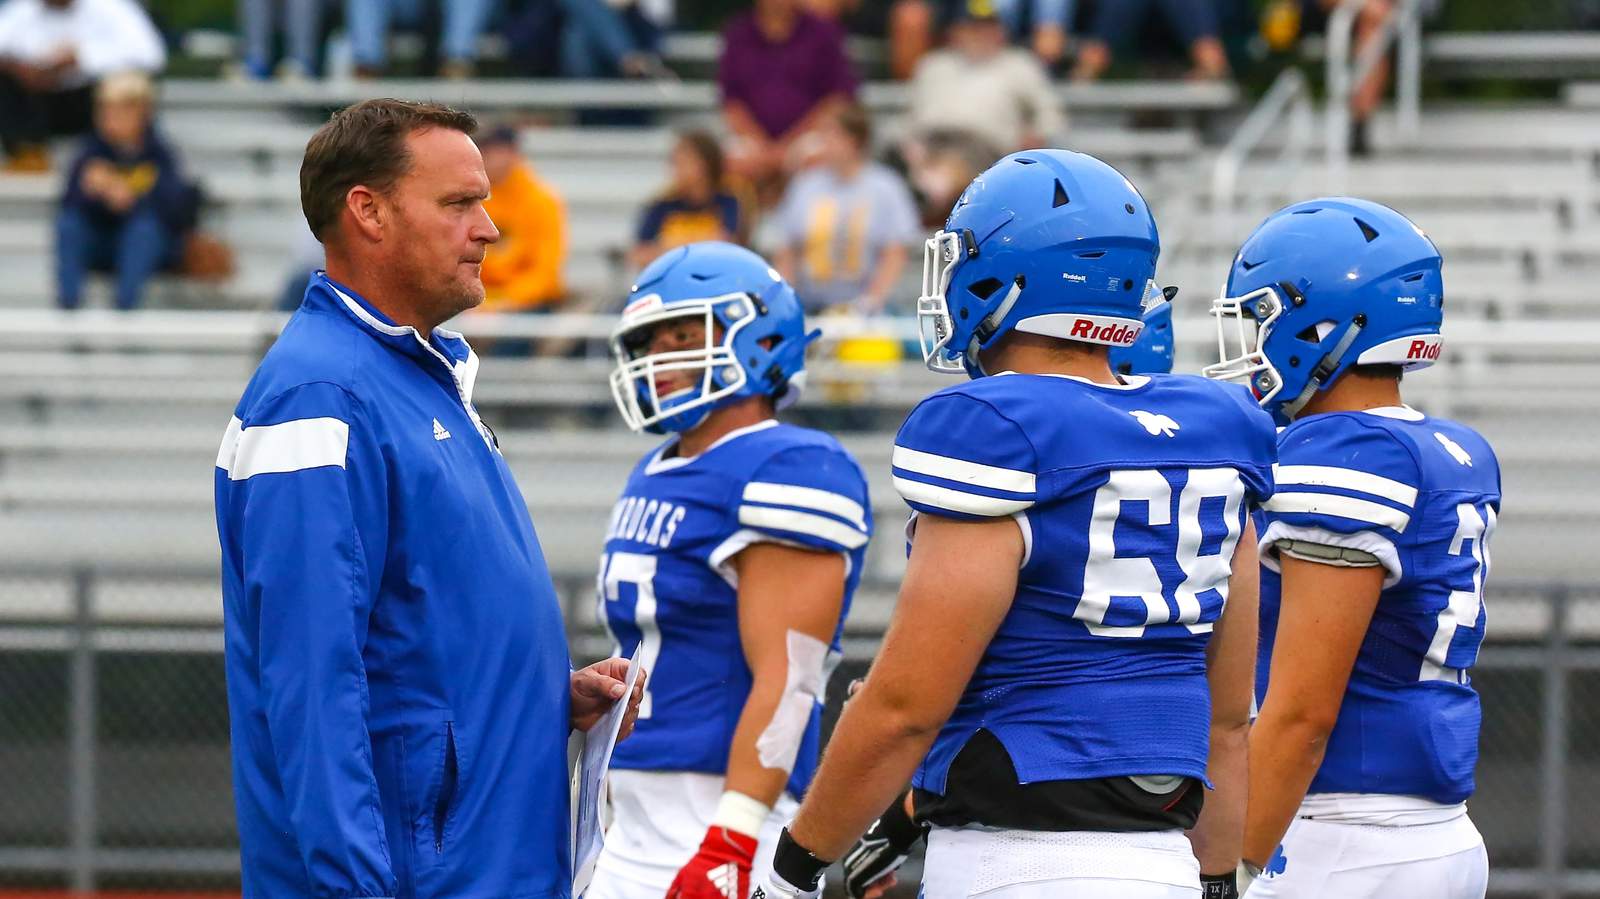 4Frenzy ‘Coach of the Week’: Detroit Catholic Central football’s Dan Anderson